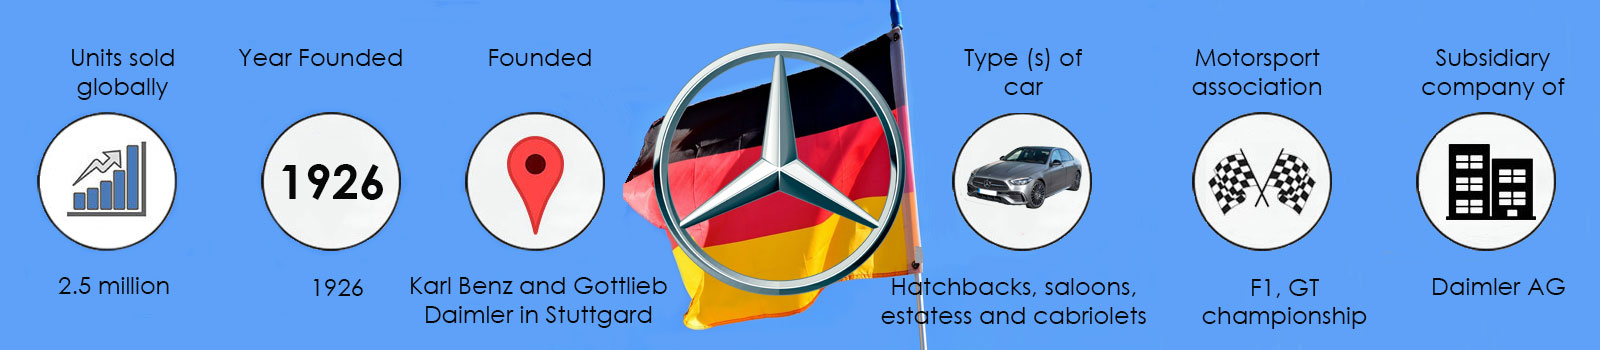 The history of Mercedes-Benz infographic showing sales, founding information and car facts